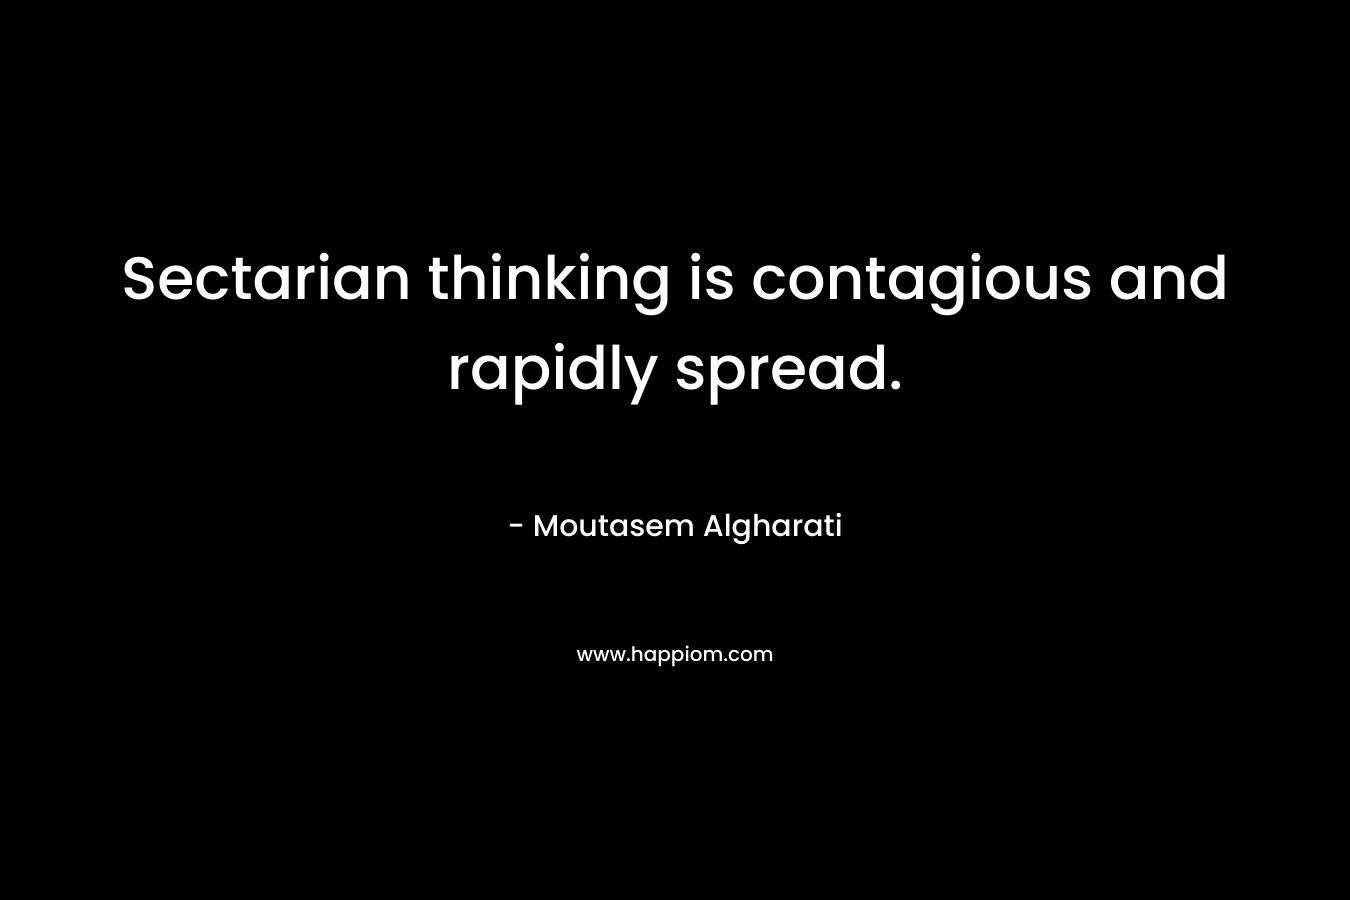 Sectarian thinking is contagious and rapidly spread. – Moutasem Algharati